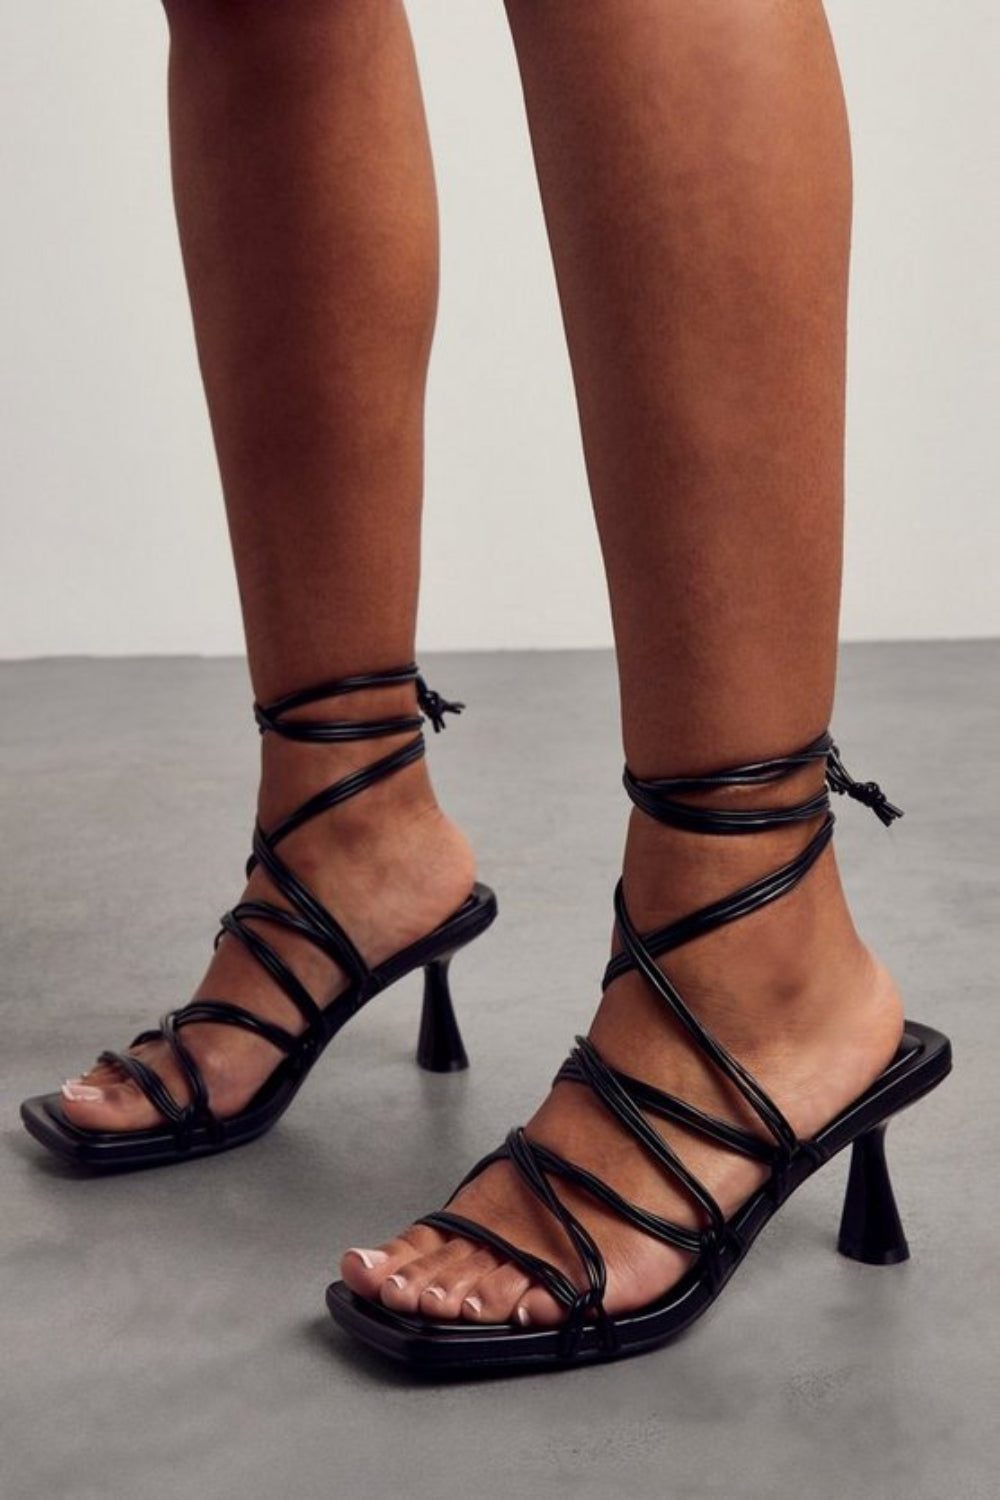 Black Low Heel Strappy Sandal with Square Toe & Leg Tie